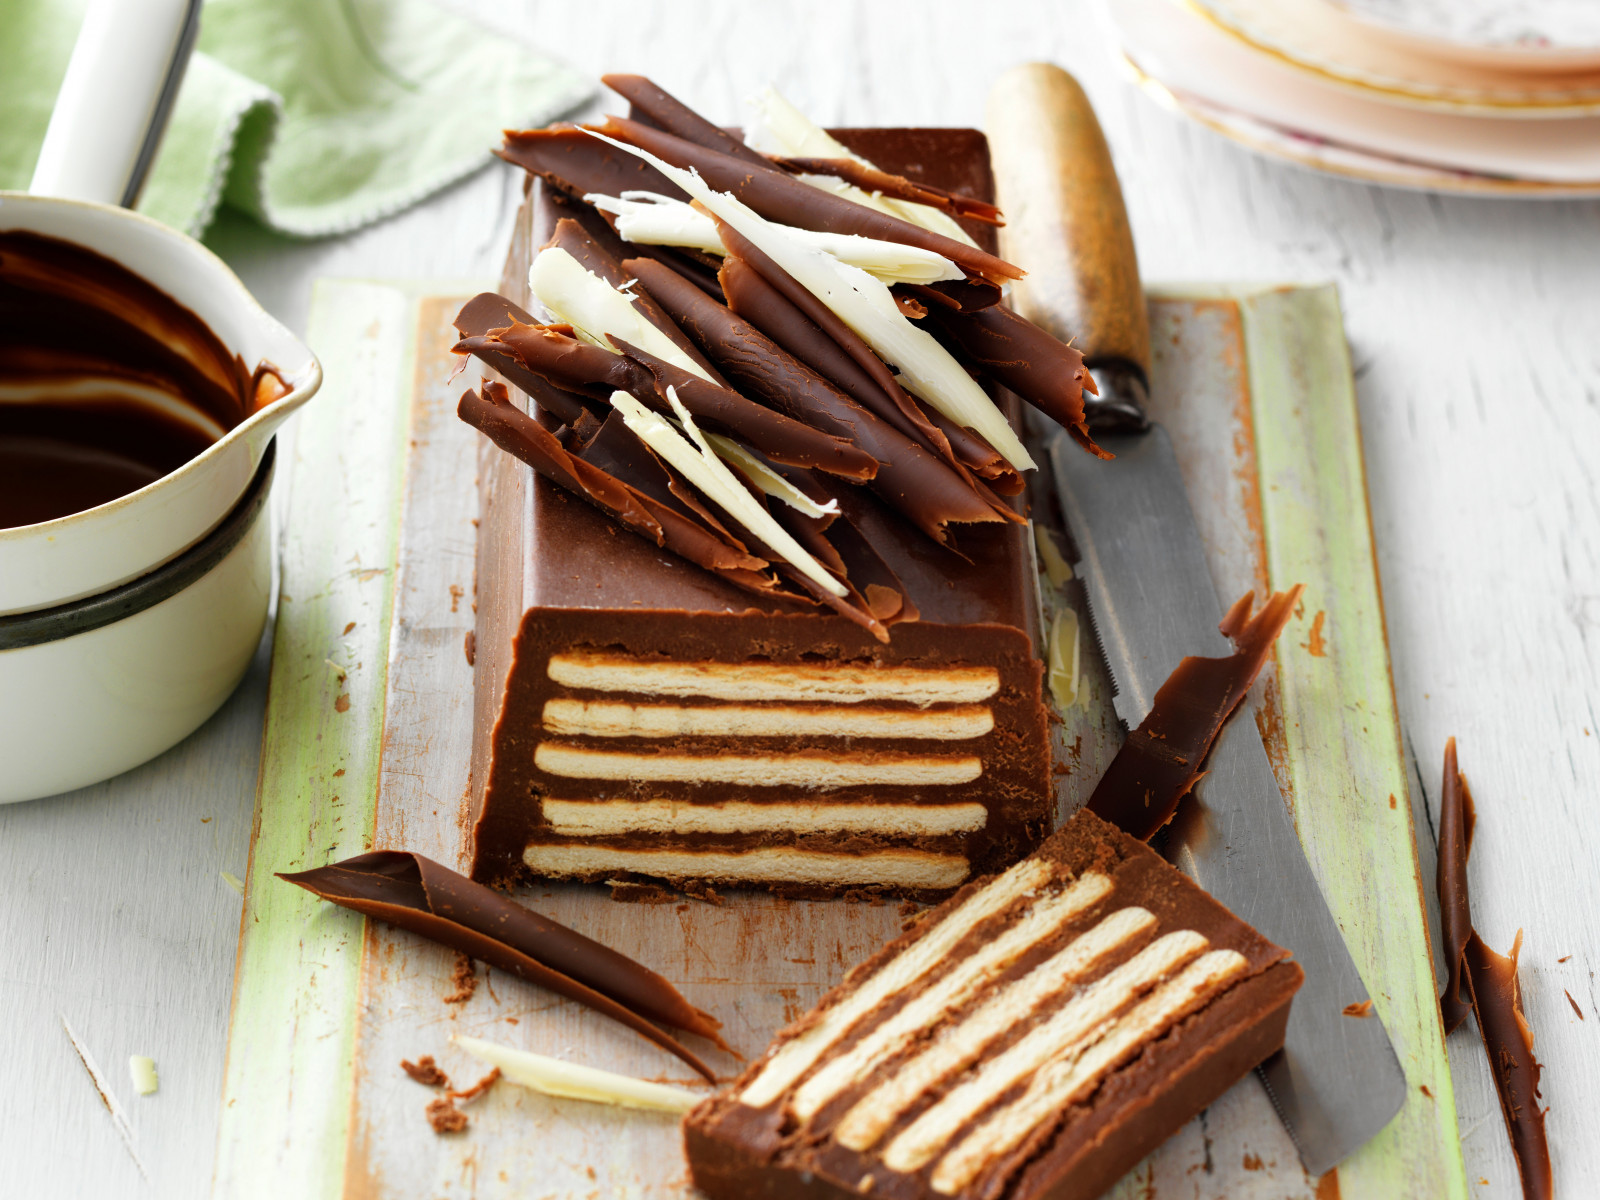 No-bake Marie biscuits tower cake with chocolate and coffee